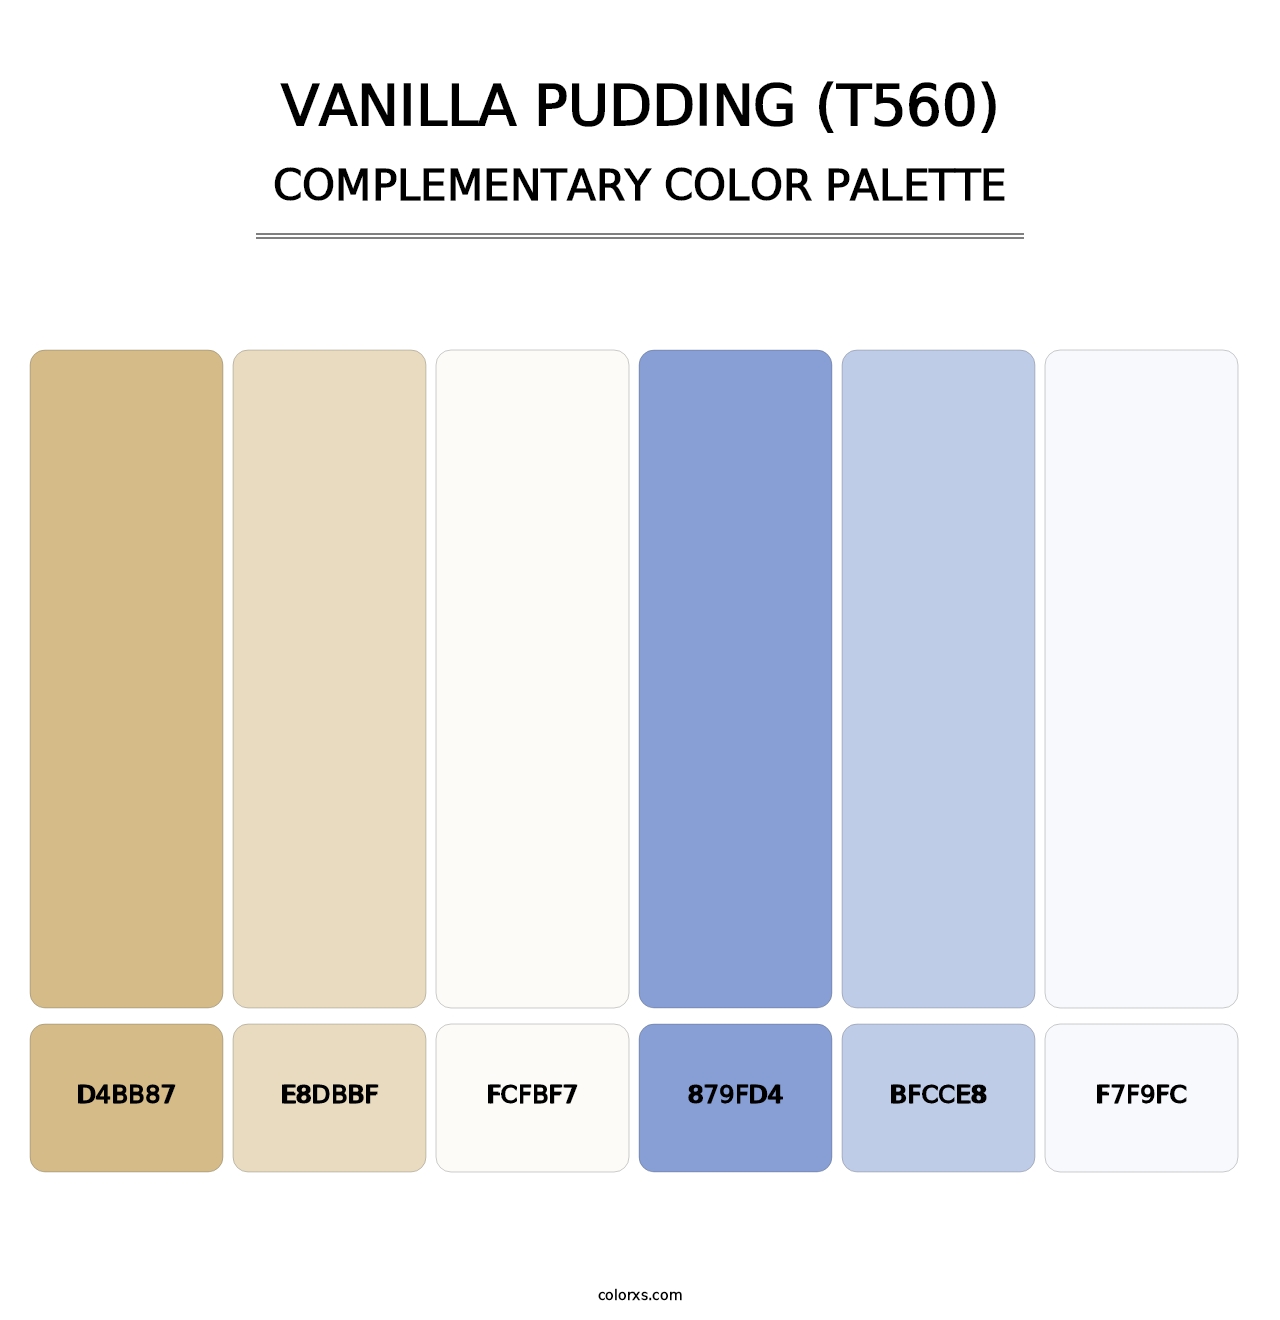 Vanilla Pudding (T560) - Complementary Color Palette